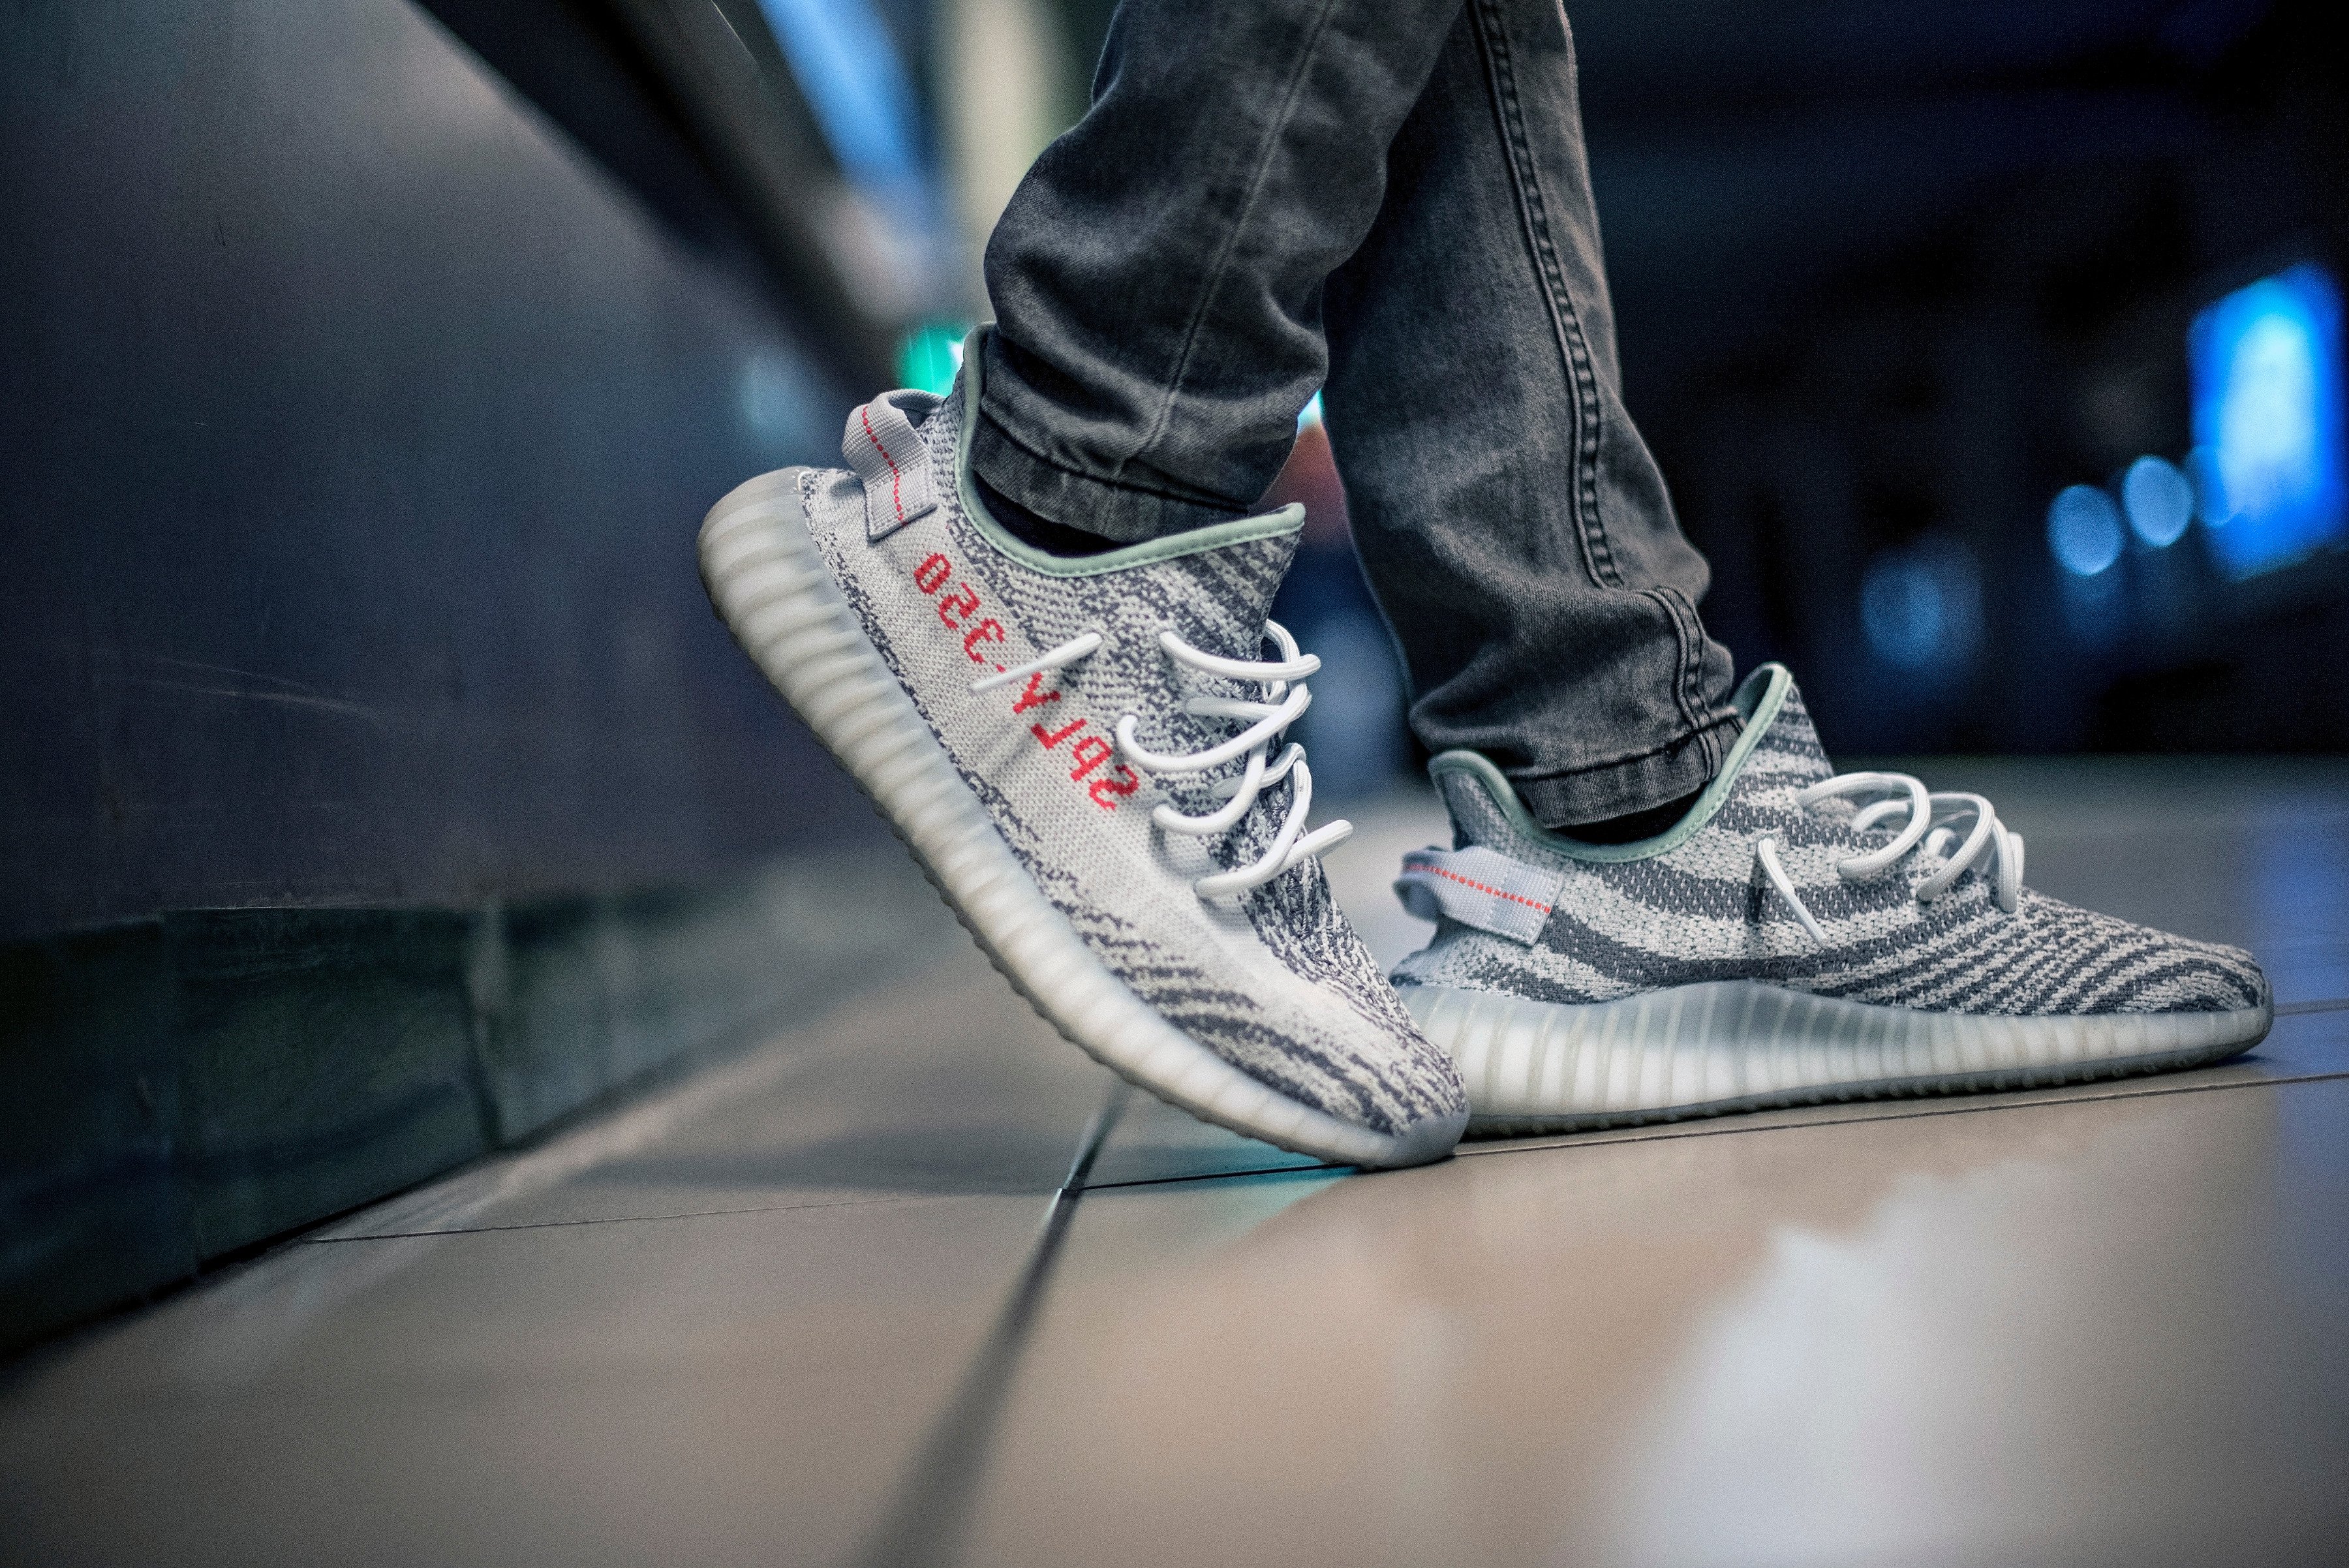 Brillante Asesor Constituir The fate of Adidas' excess Yeezy stock, after splitting from Ye, aka Kanye  West: rather than 'burn' it, CEO Bjørn Gulden plans to sell the sneakers  and donate the proceeds to charity 